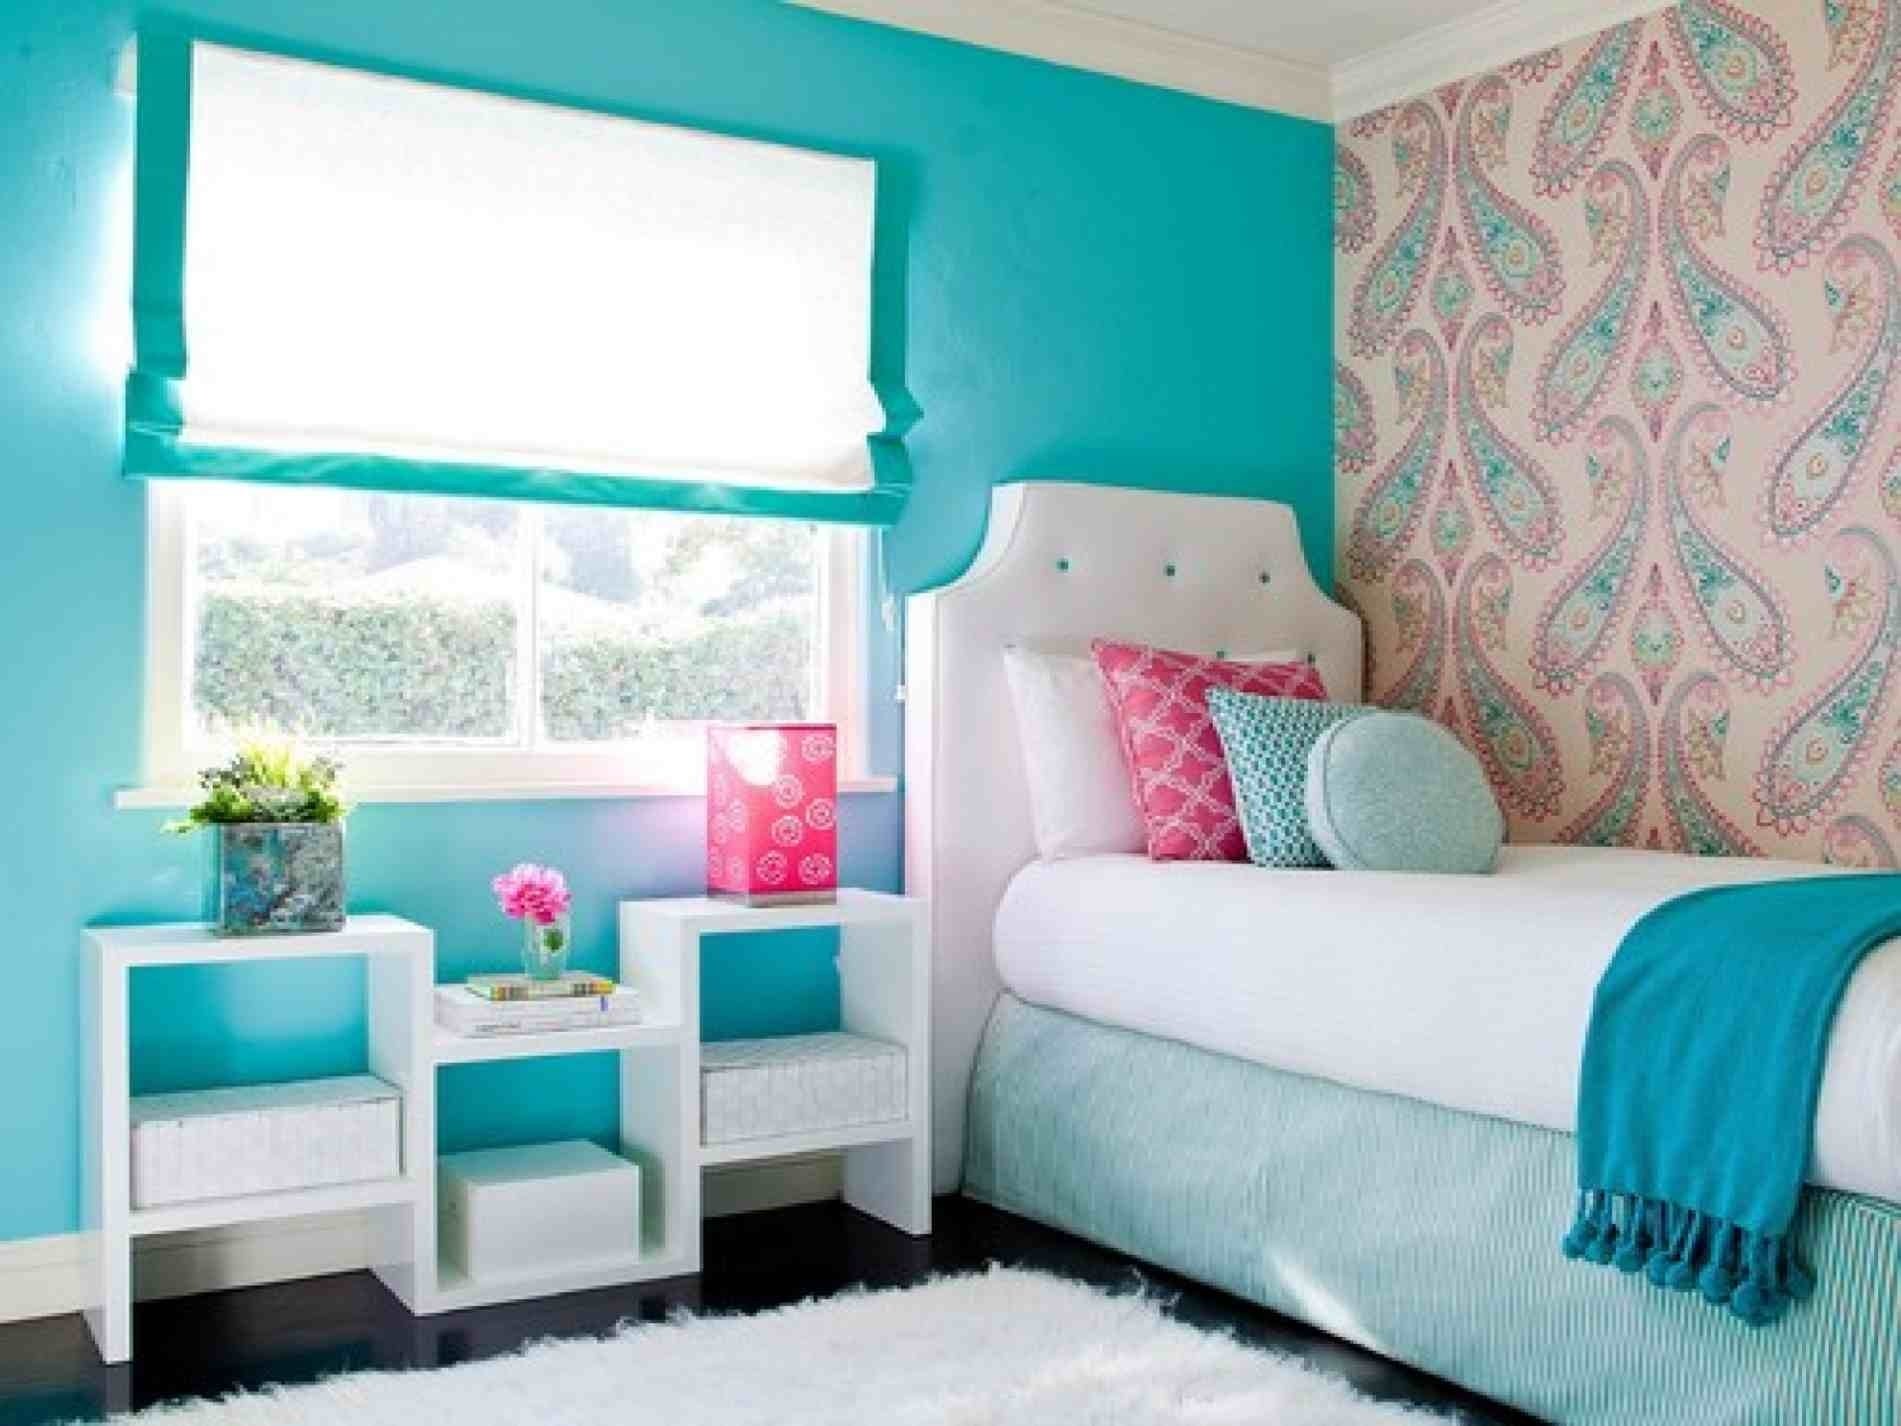 10 Most Recommended Small Bedroom Ideas For Teenage Girls small bedroom design ideas for teenage homes and gardens bedroom 2022